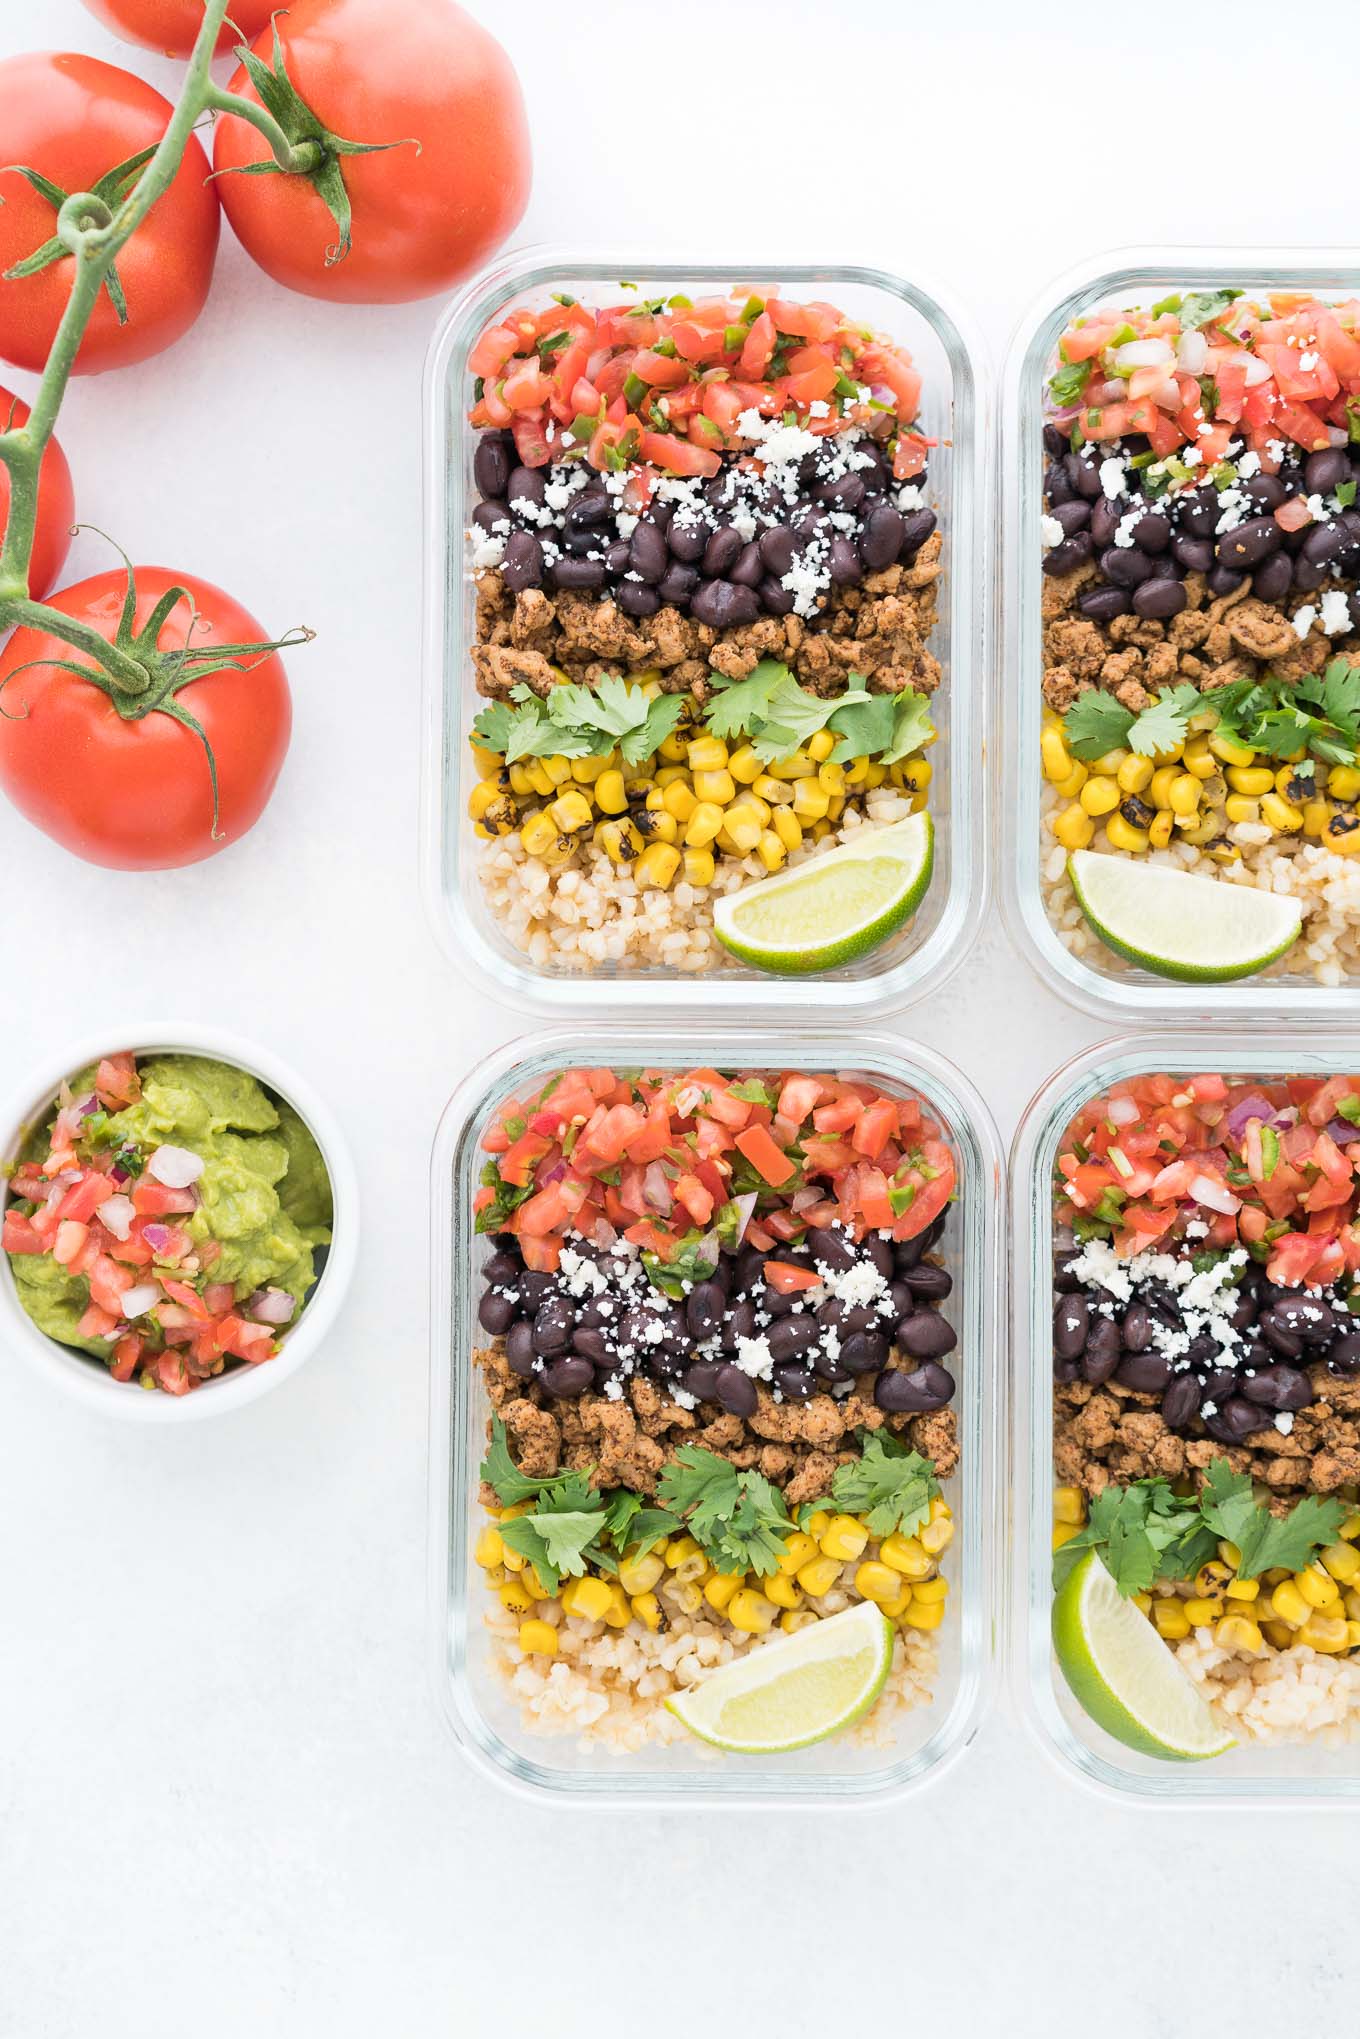 Meal Prep Burrito Bowls with Guacamole Dish and Tomatoes